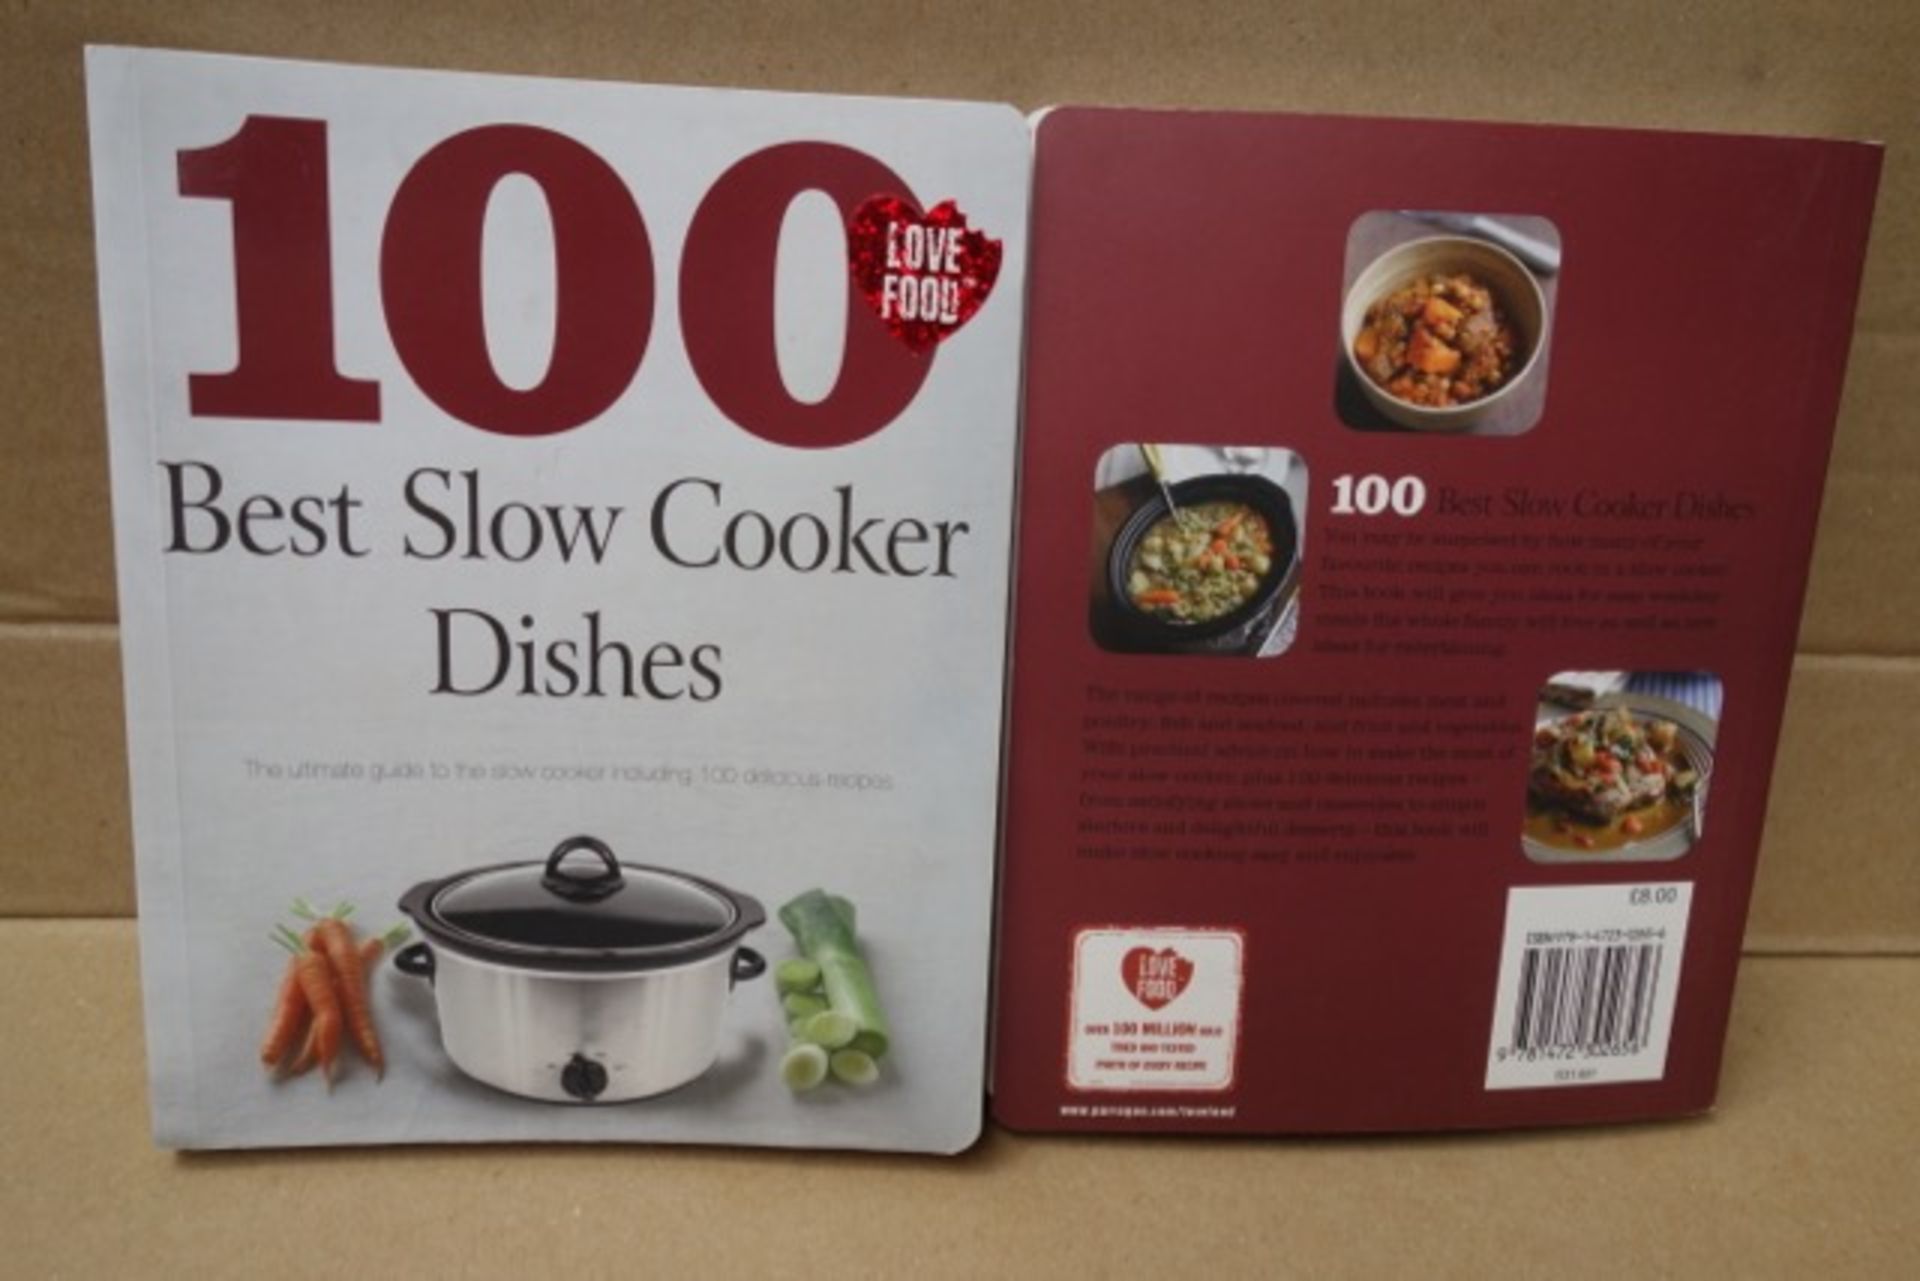 108 x Love Food 100 Best Slow Cooker Dishes. The ultimate guide to slow cooker including 100